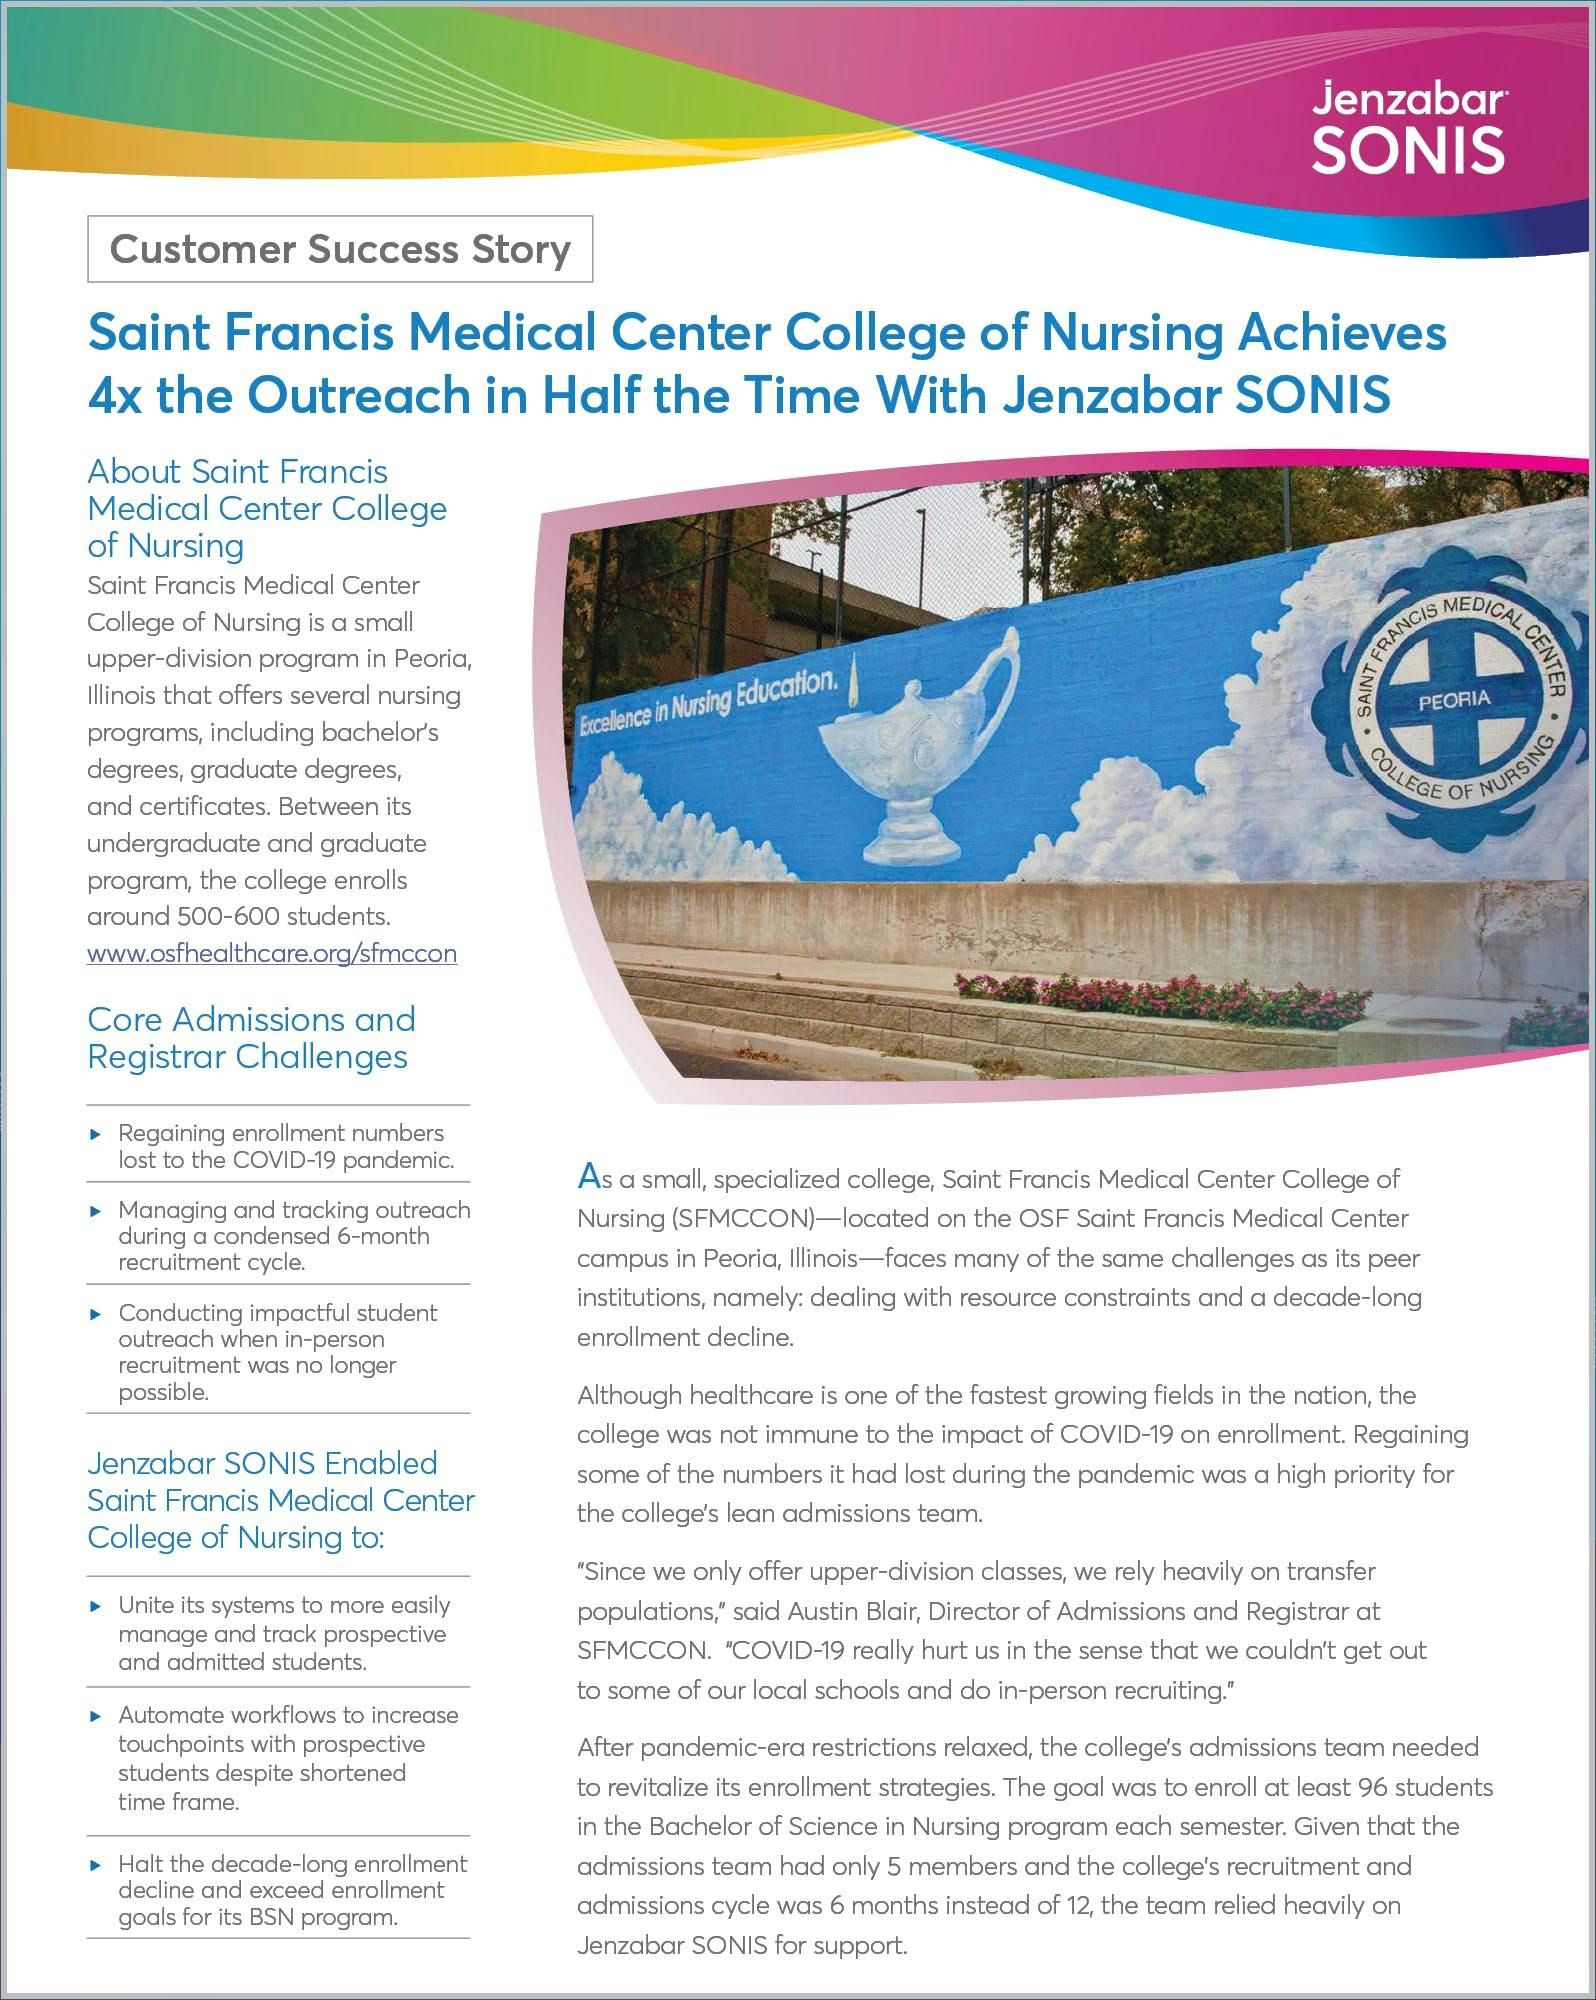 Saint Francis Medical Center College of Nursing Achieves 4X the Outreach in Half the Time With Jenzabar SONIS